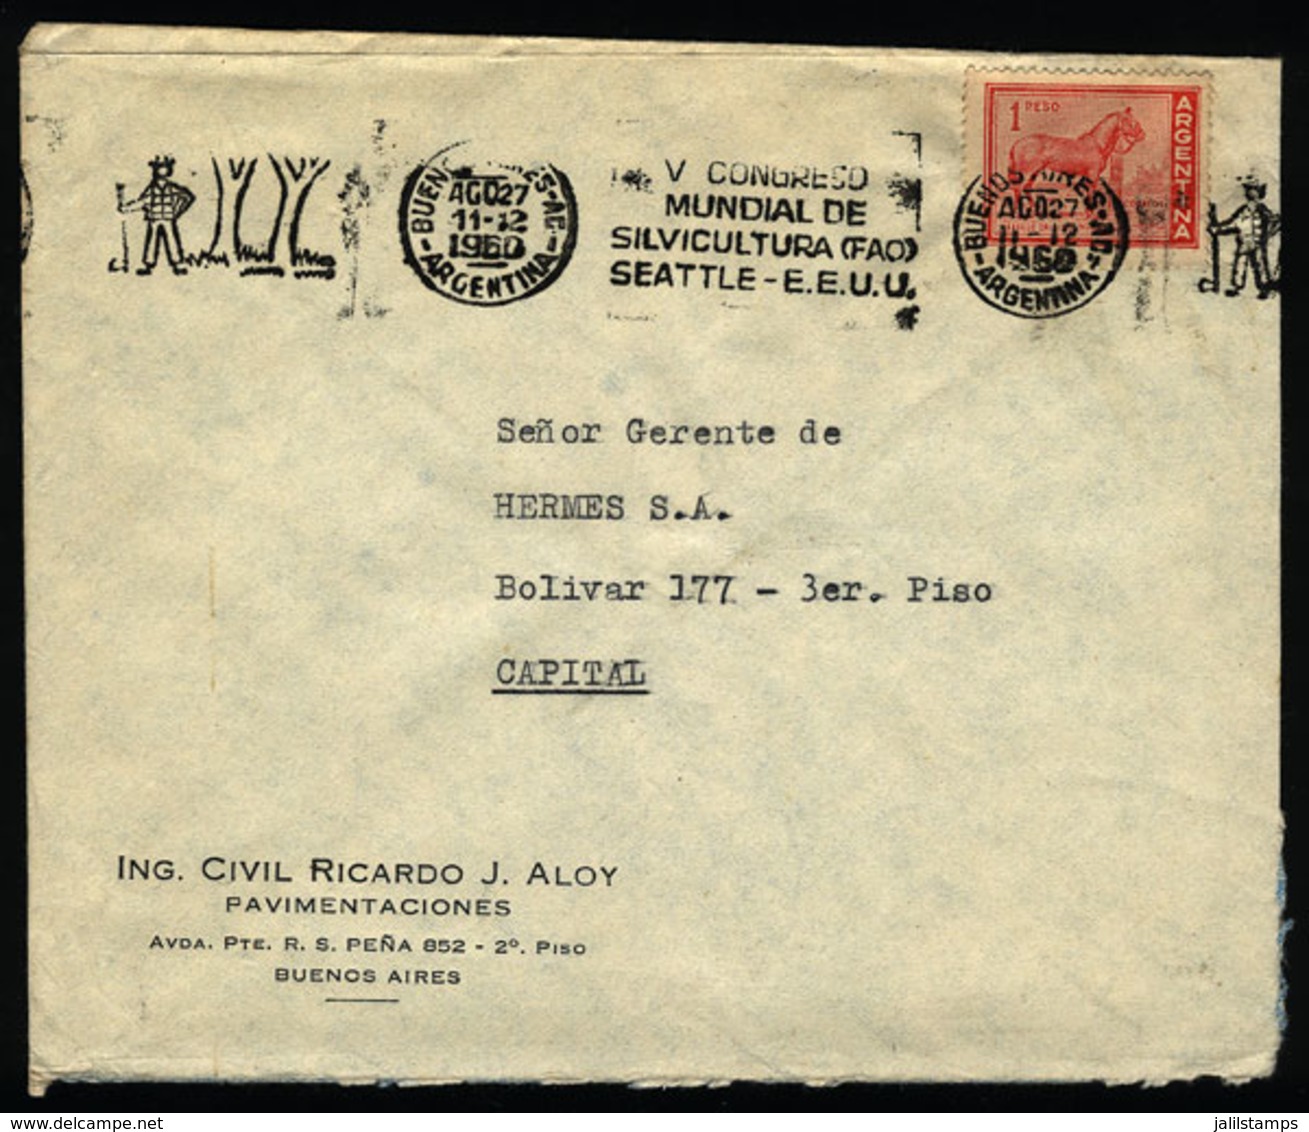 ARGENTINA: Cover Used In Buenos Aires On 27/AU/1960, With Slogan Cancel "Intl. Congress Of Forestry - Seattle USA", VF Q - Brieven En Documenten